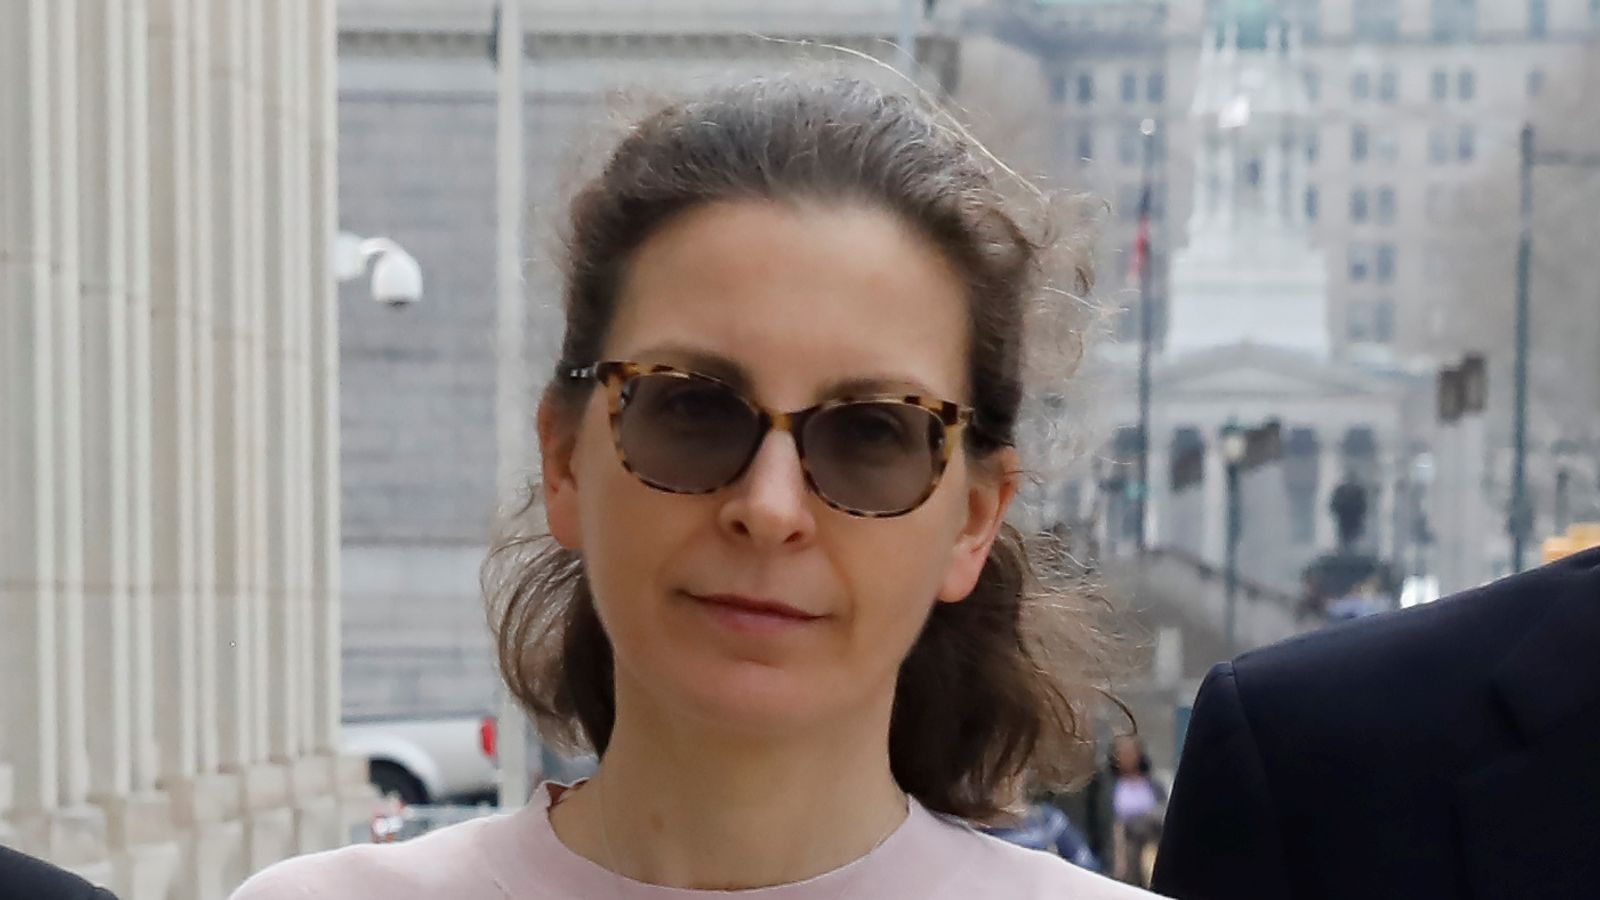 Seagram Heiress Clare Bronfman Jailed For Six Years Over Role In Nxivm Sex Slaves Cult Us News 0762